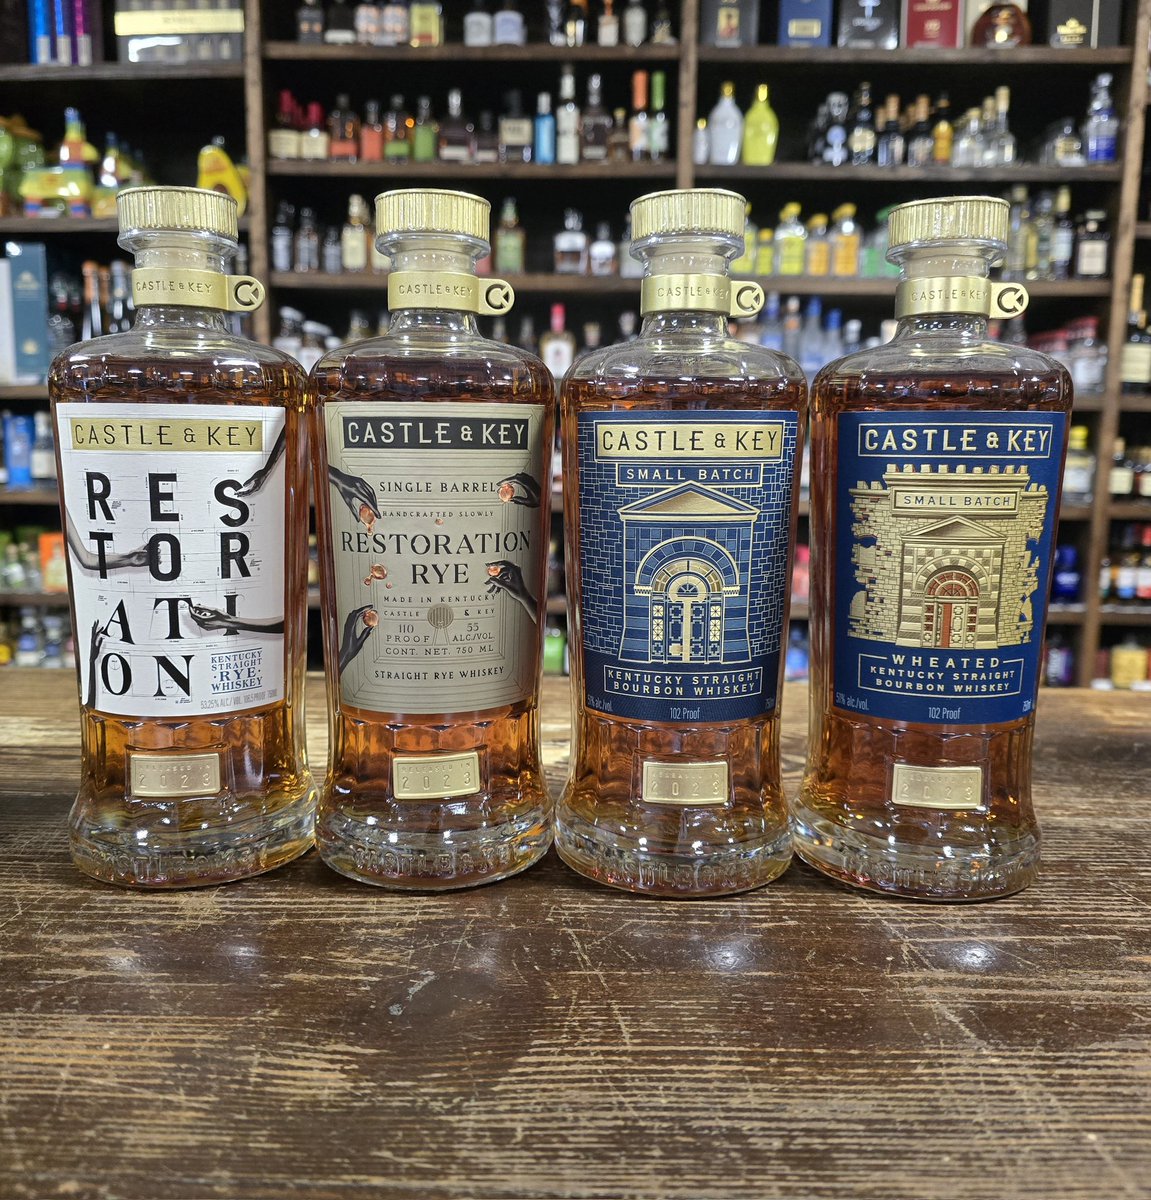 @castleandkey is located in Frankfort, KY in the old Colonel Edmund Haynes Taylor, Jr distillery site. In our opinion, they are making some of the best whiskies currently on the market! #KYbourbon #KYrye #restorationrye #singlebarrel #smallbatch